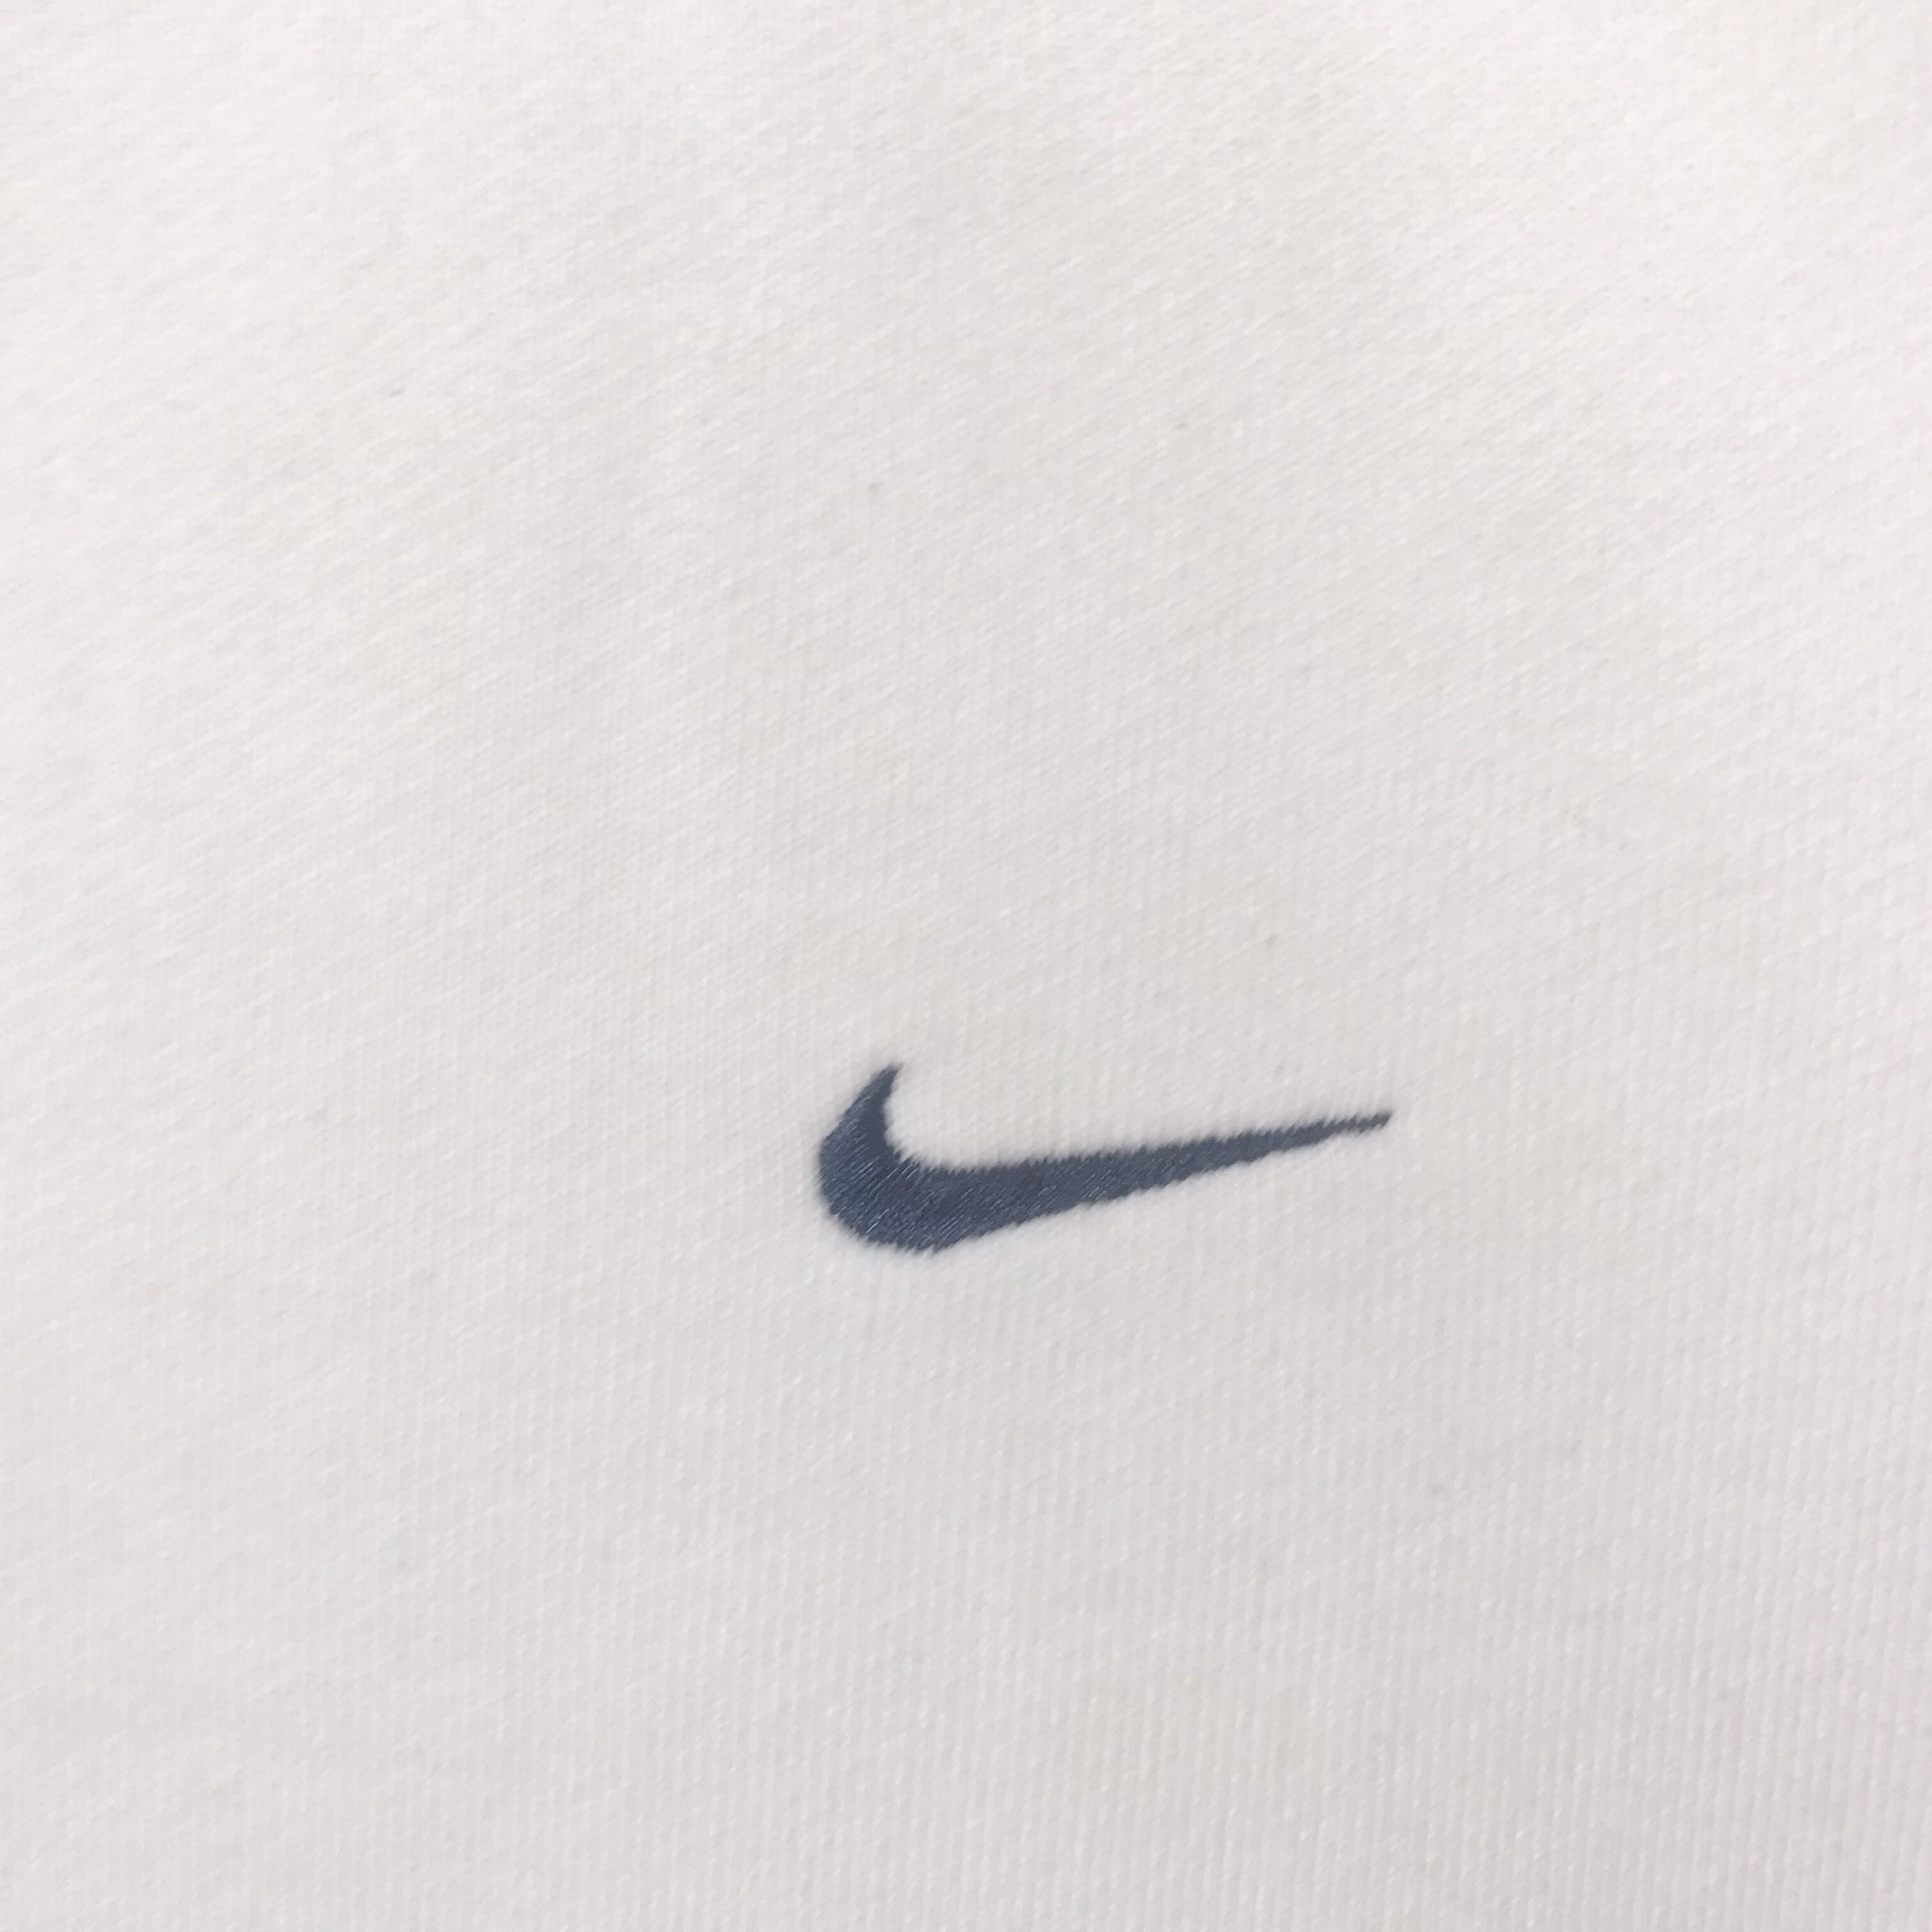 Authentic Nike Embroidered Swoosh Logo Streetwear | Etsy